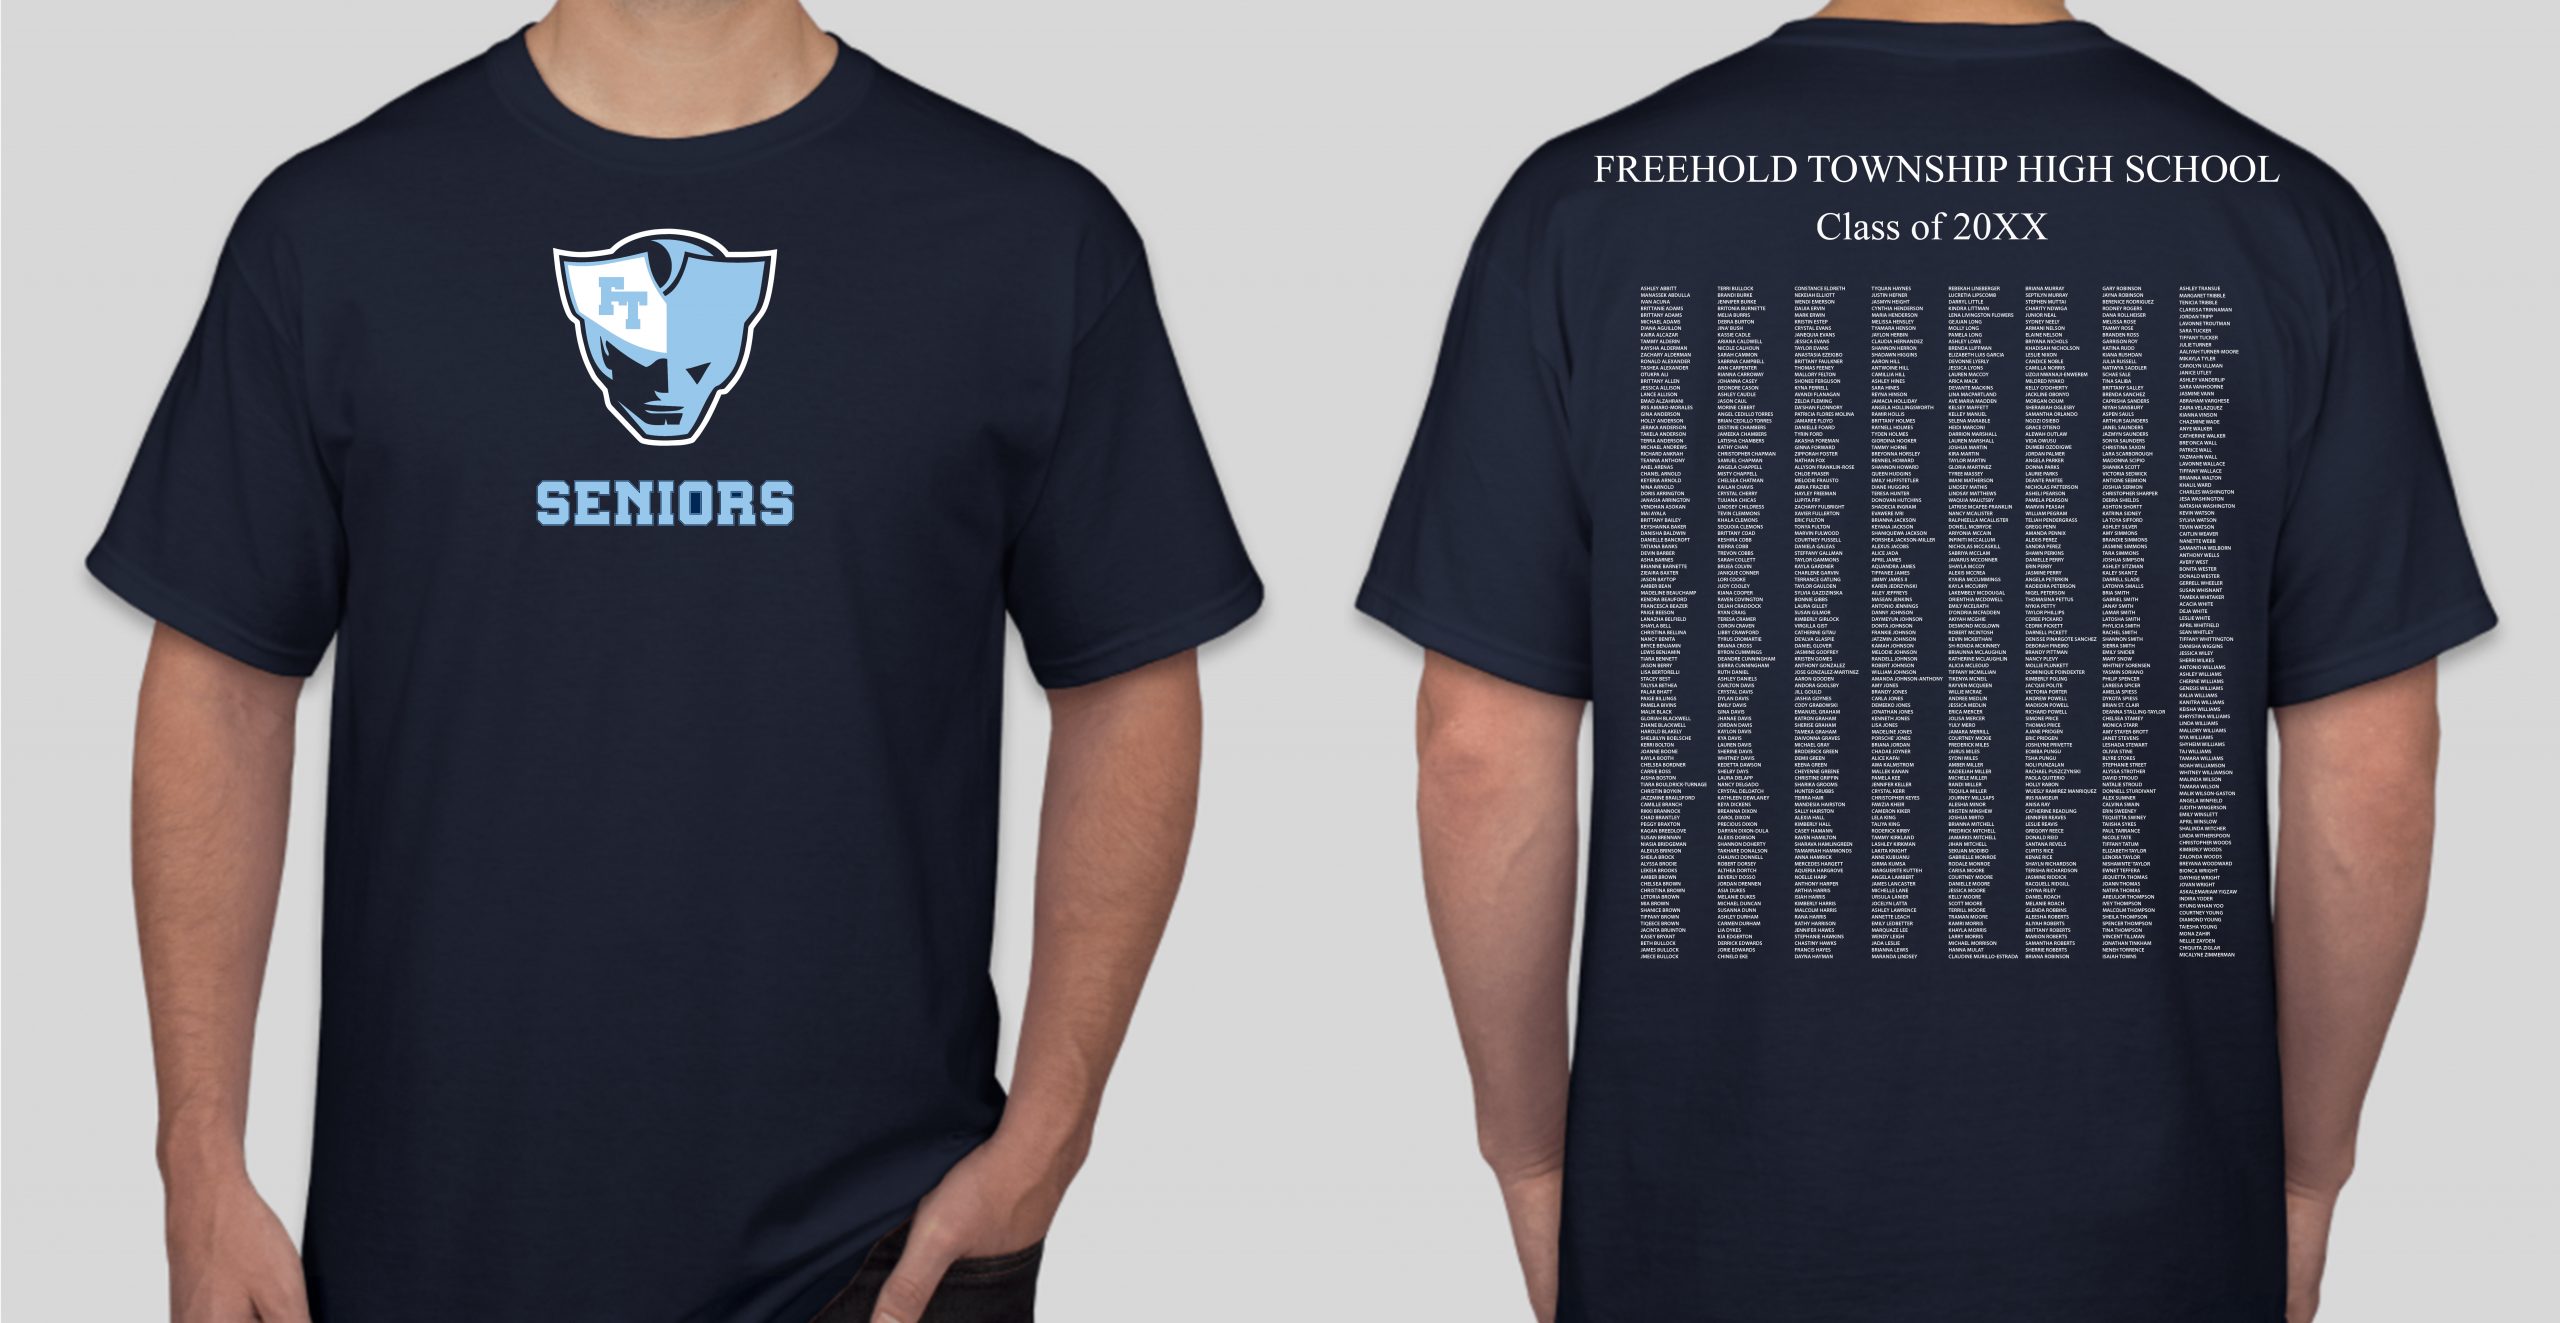 freehold township high school